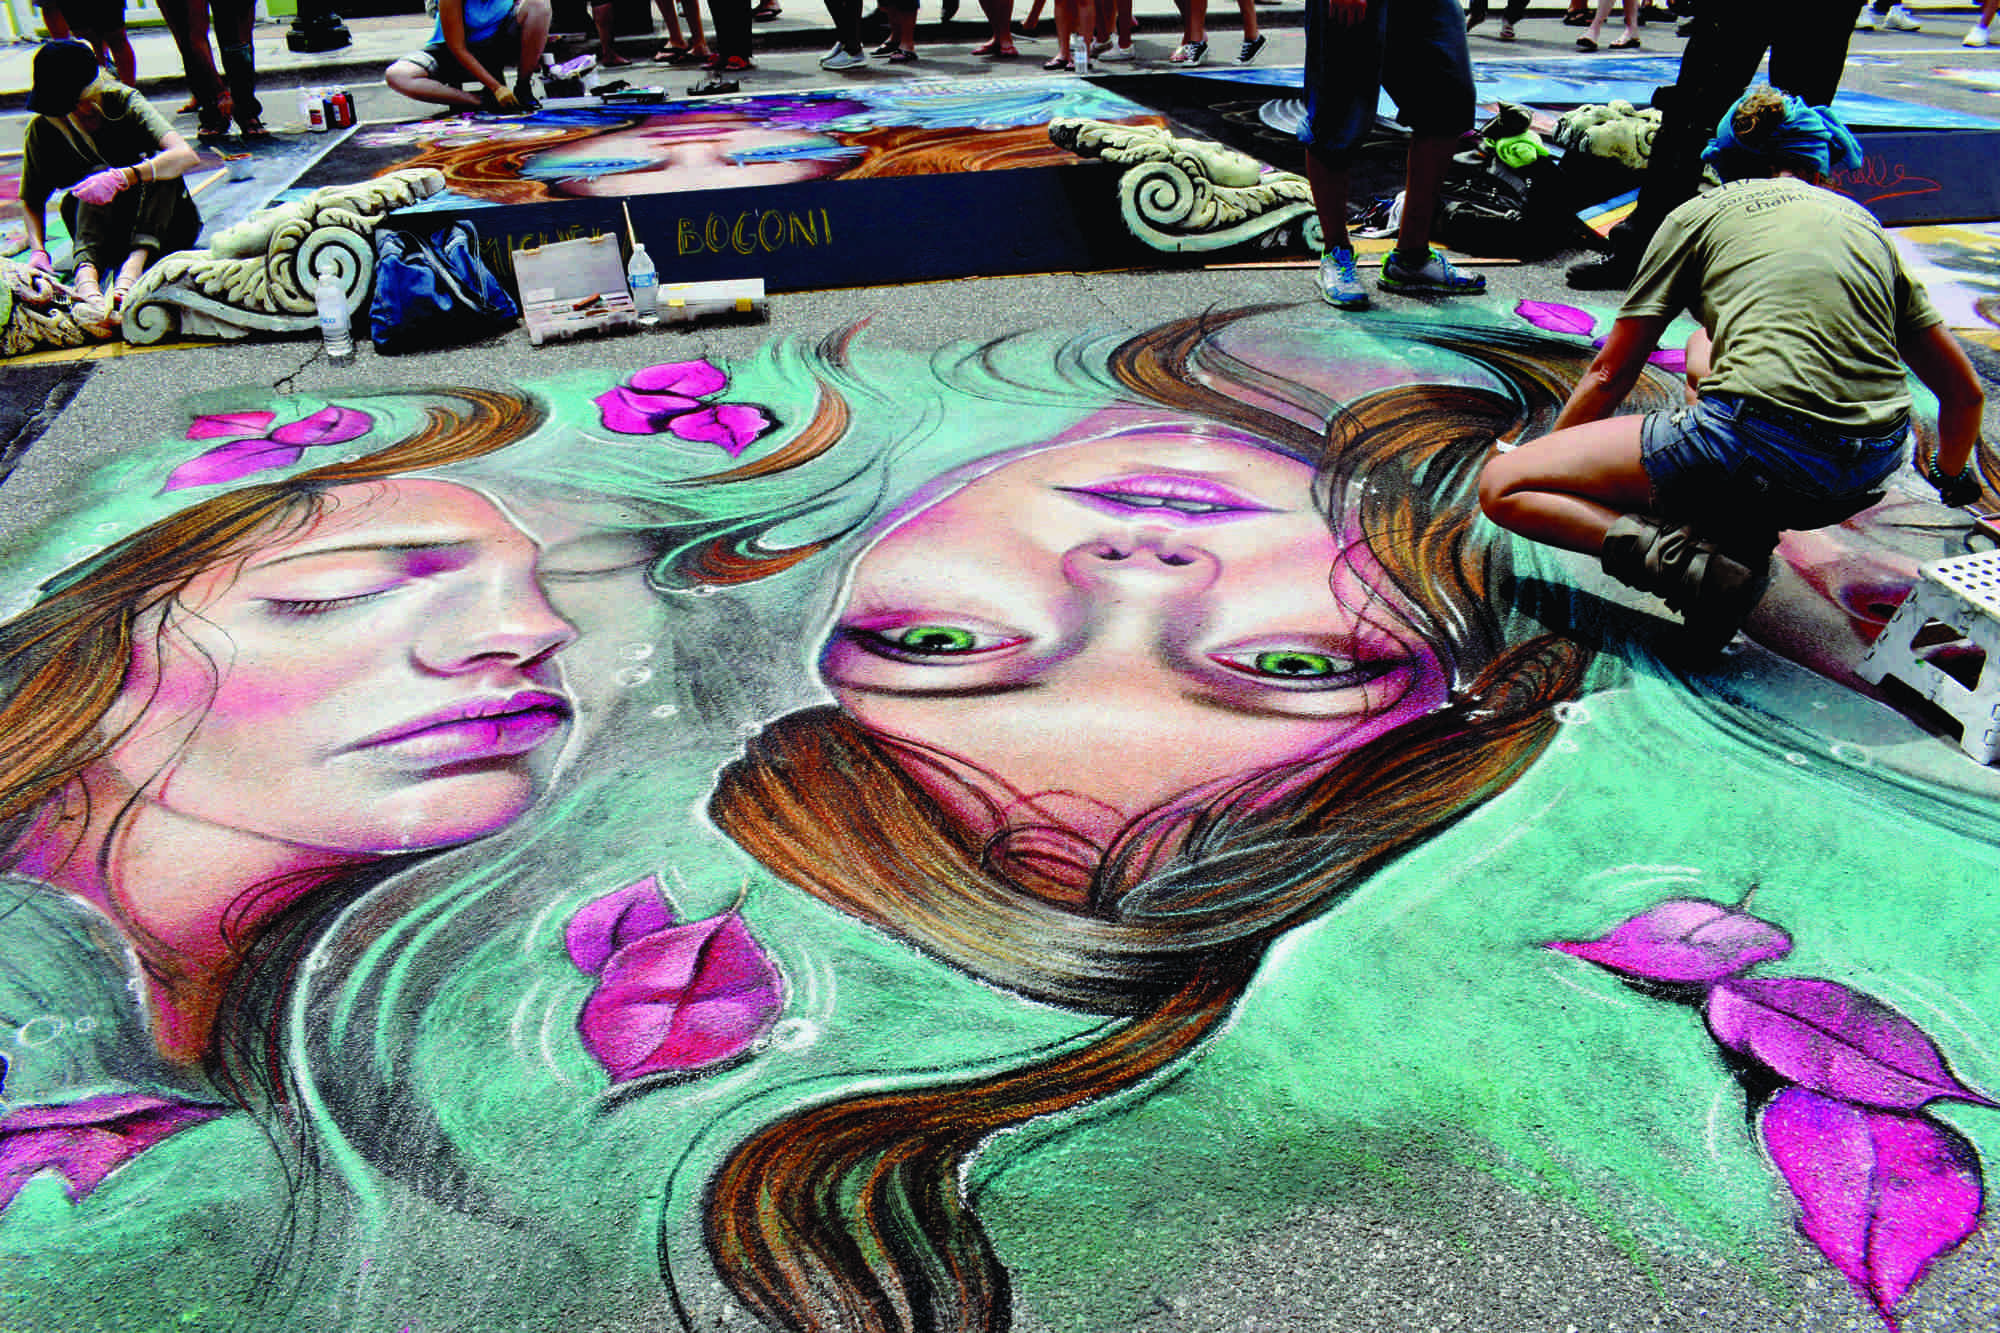 Chalk artists from around the country filled Burns Court with their work for the first time since 2014